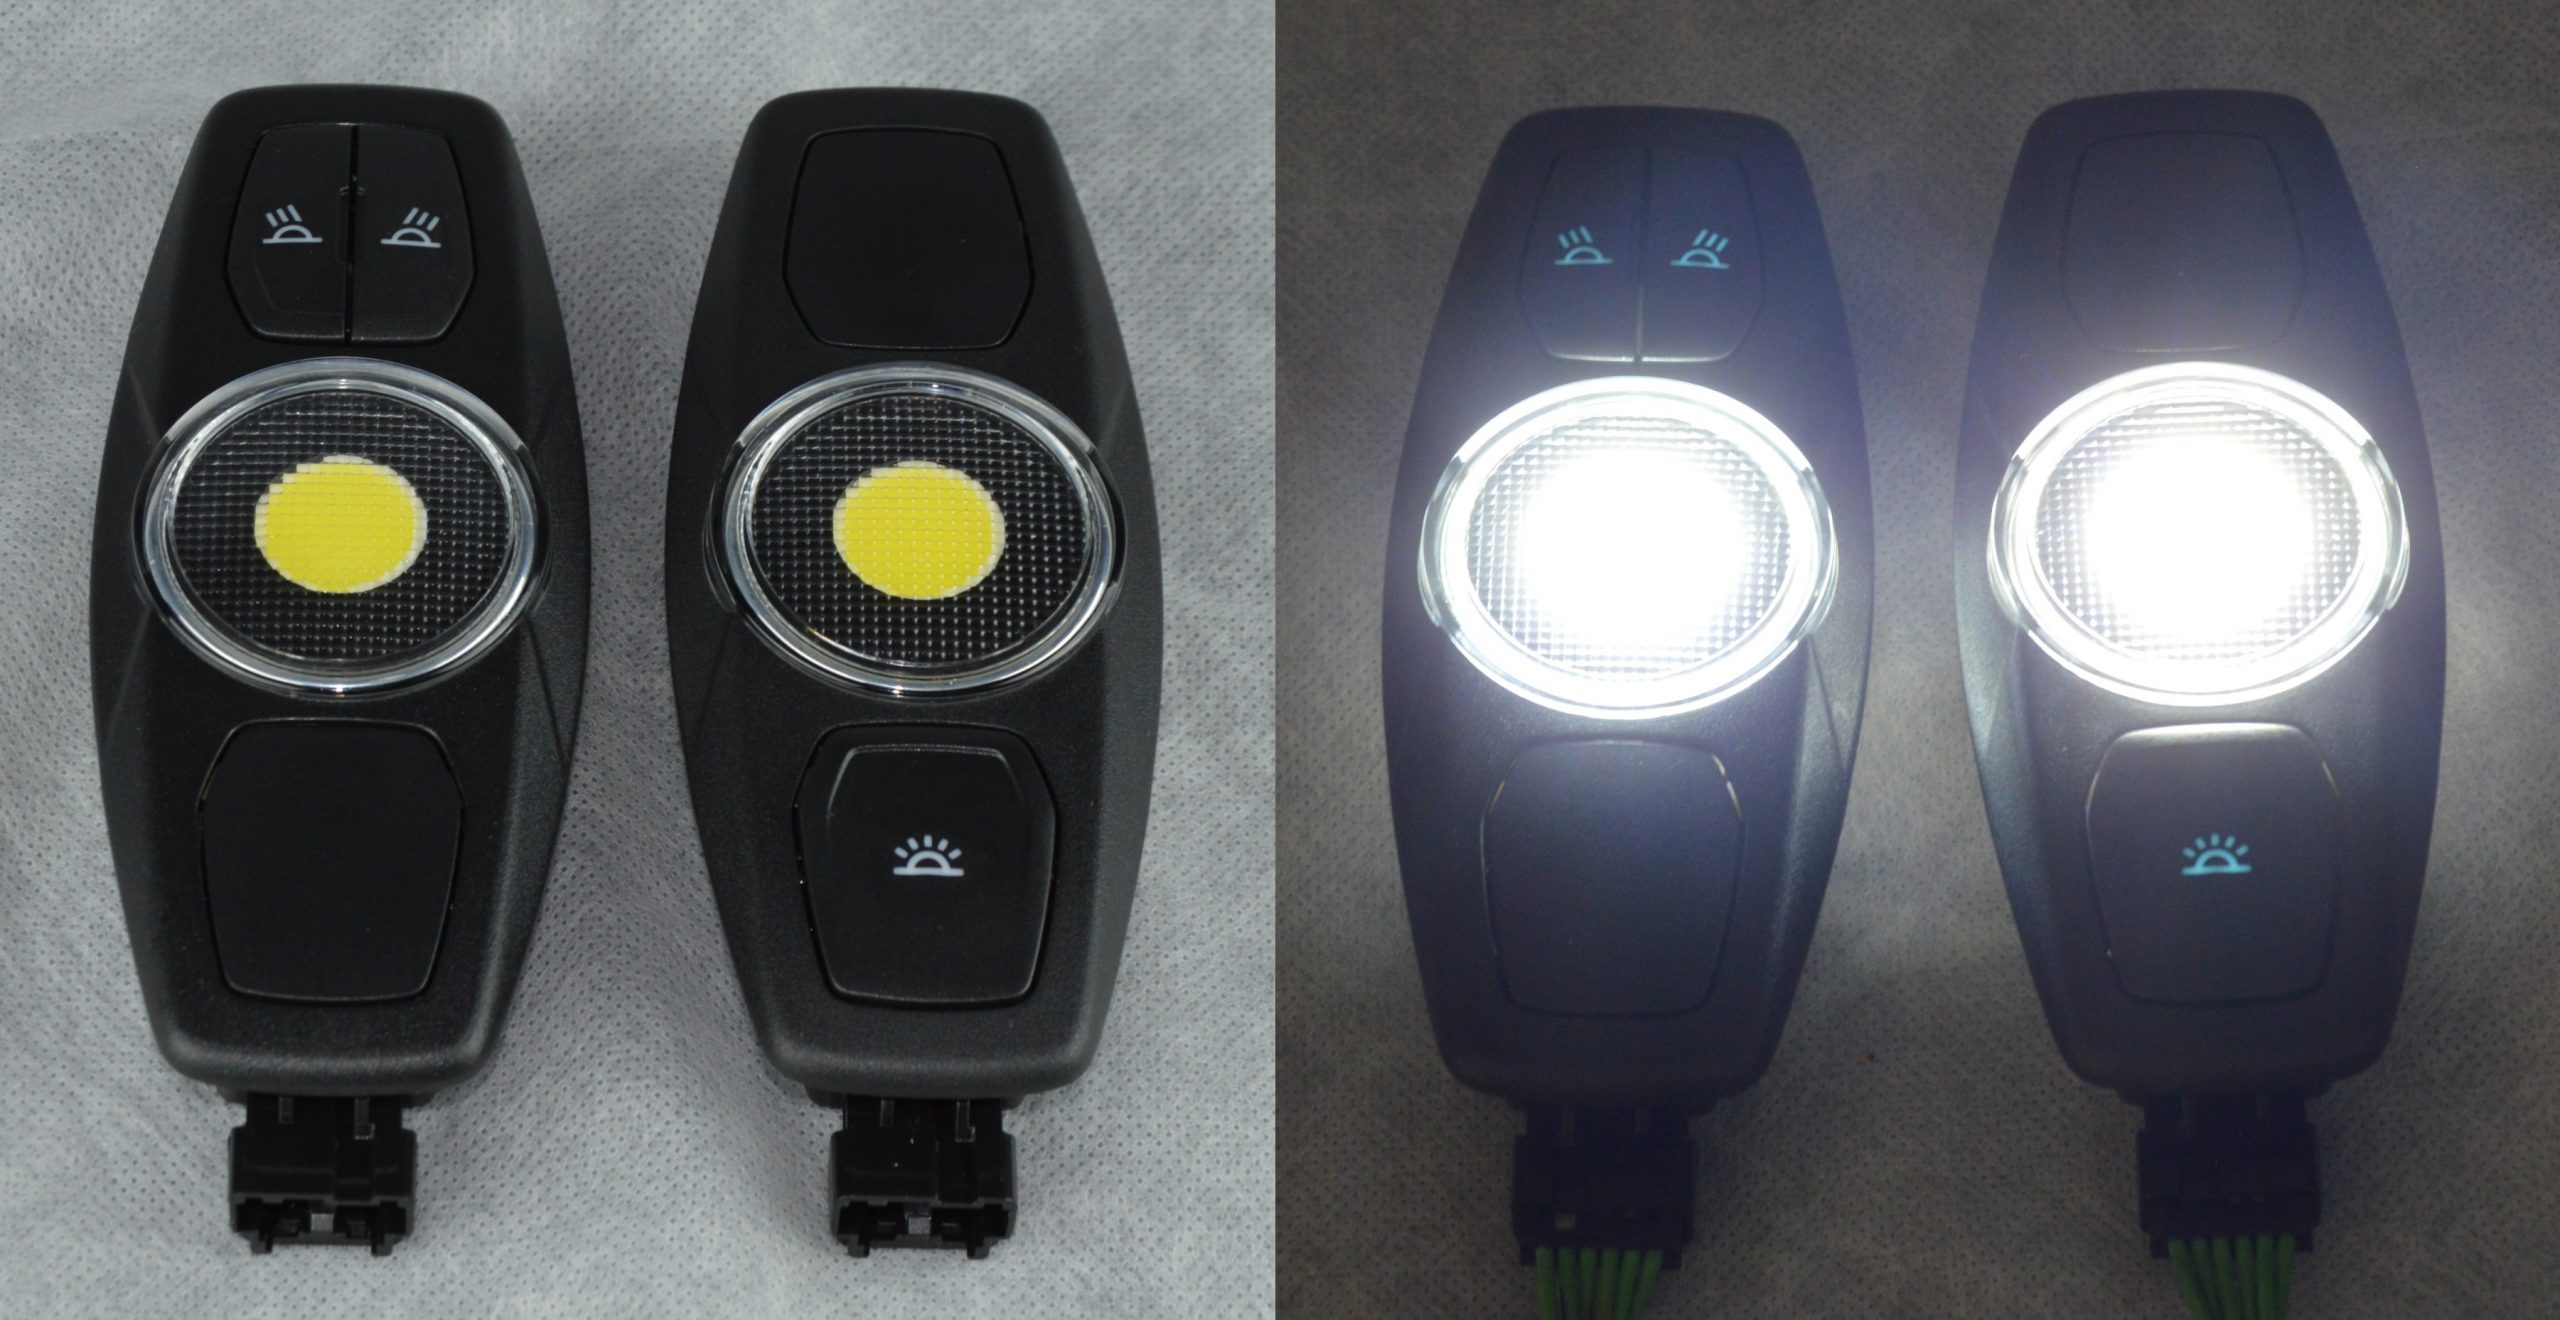 Two Dome Light Led Upgrade Service